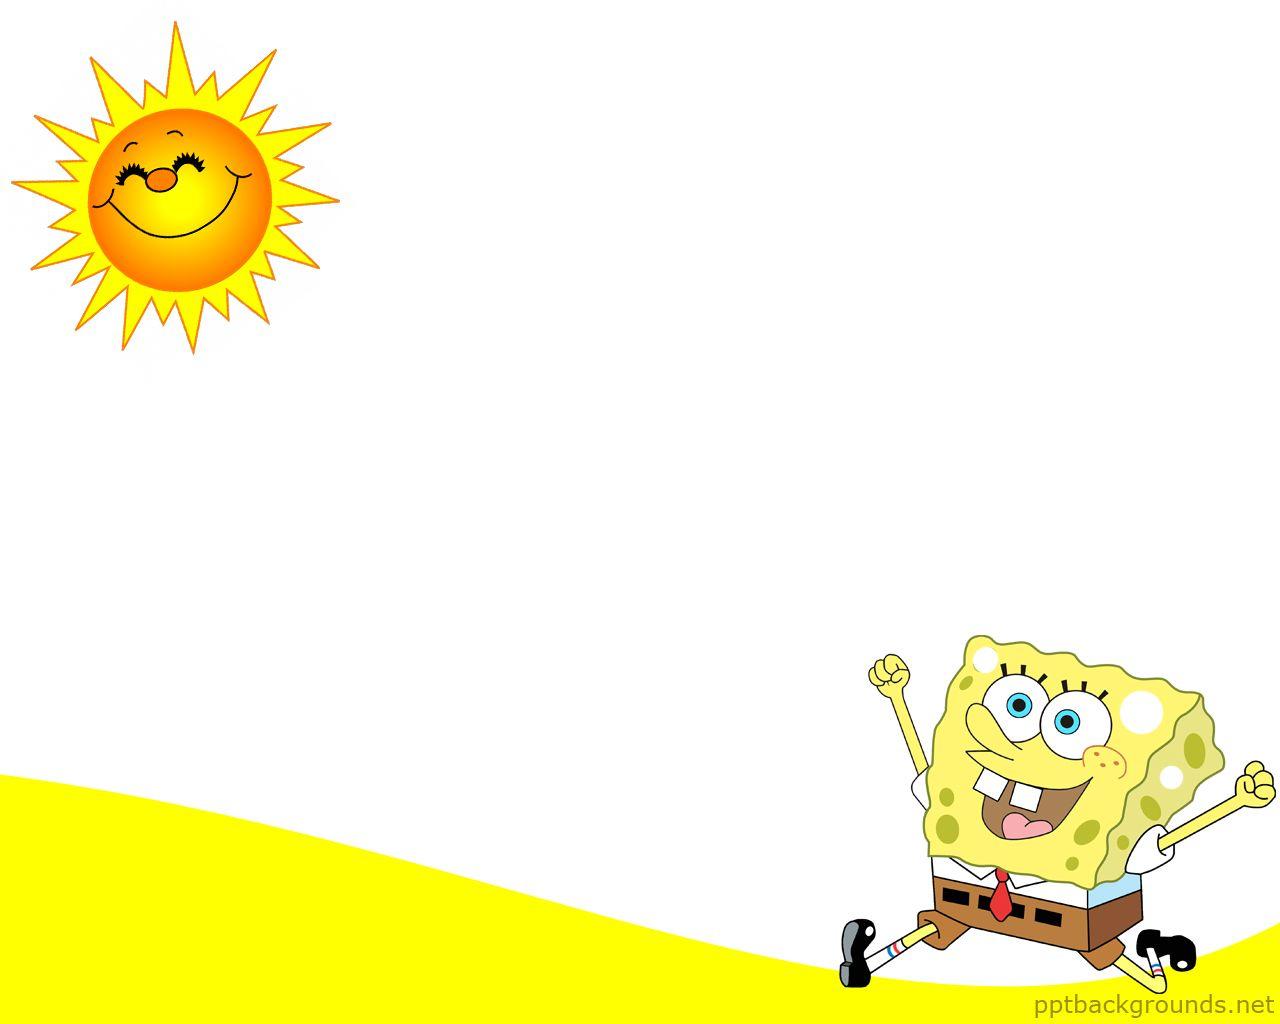 Free Spongebob Is Running In The Sun Background For PowerPoint